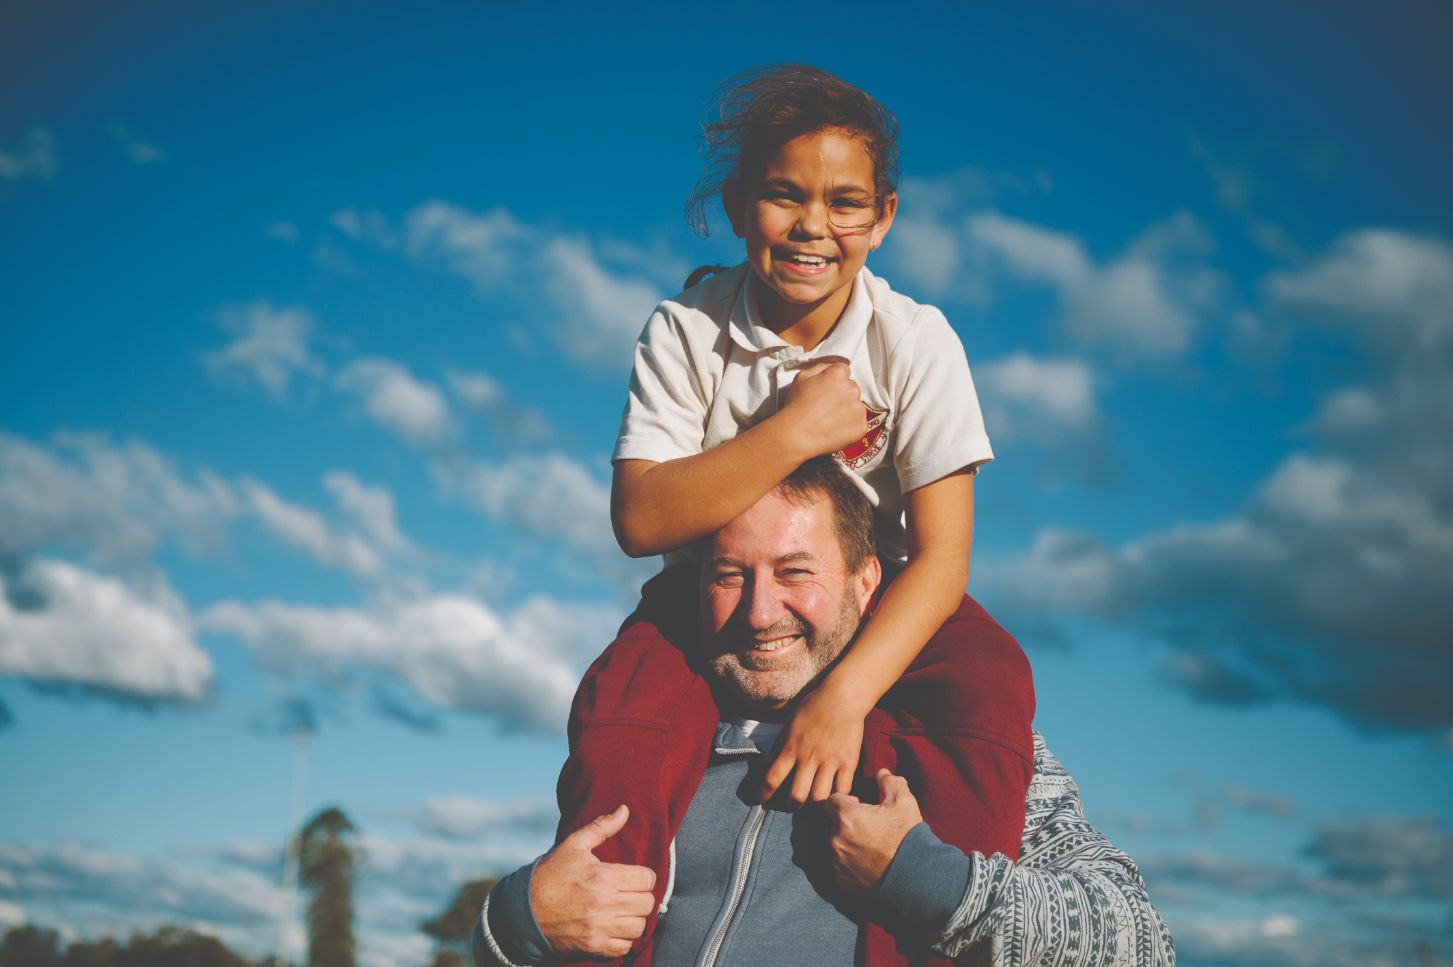 A young girl smiling and happy whilst on a mans shoulders